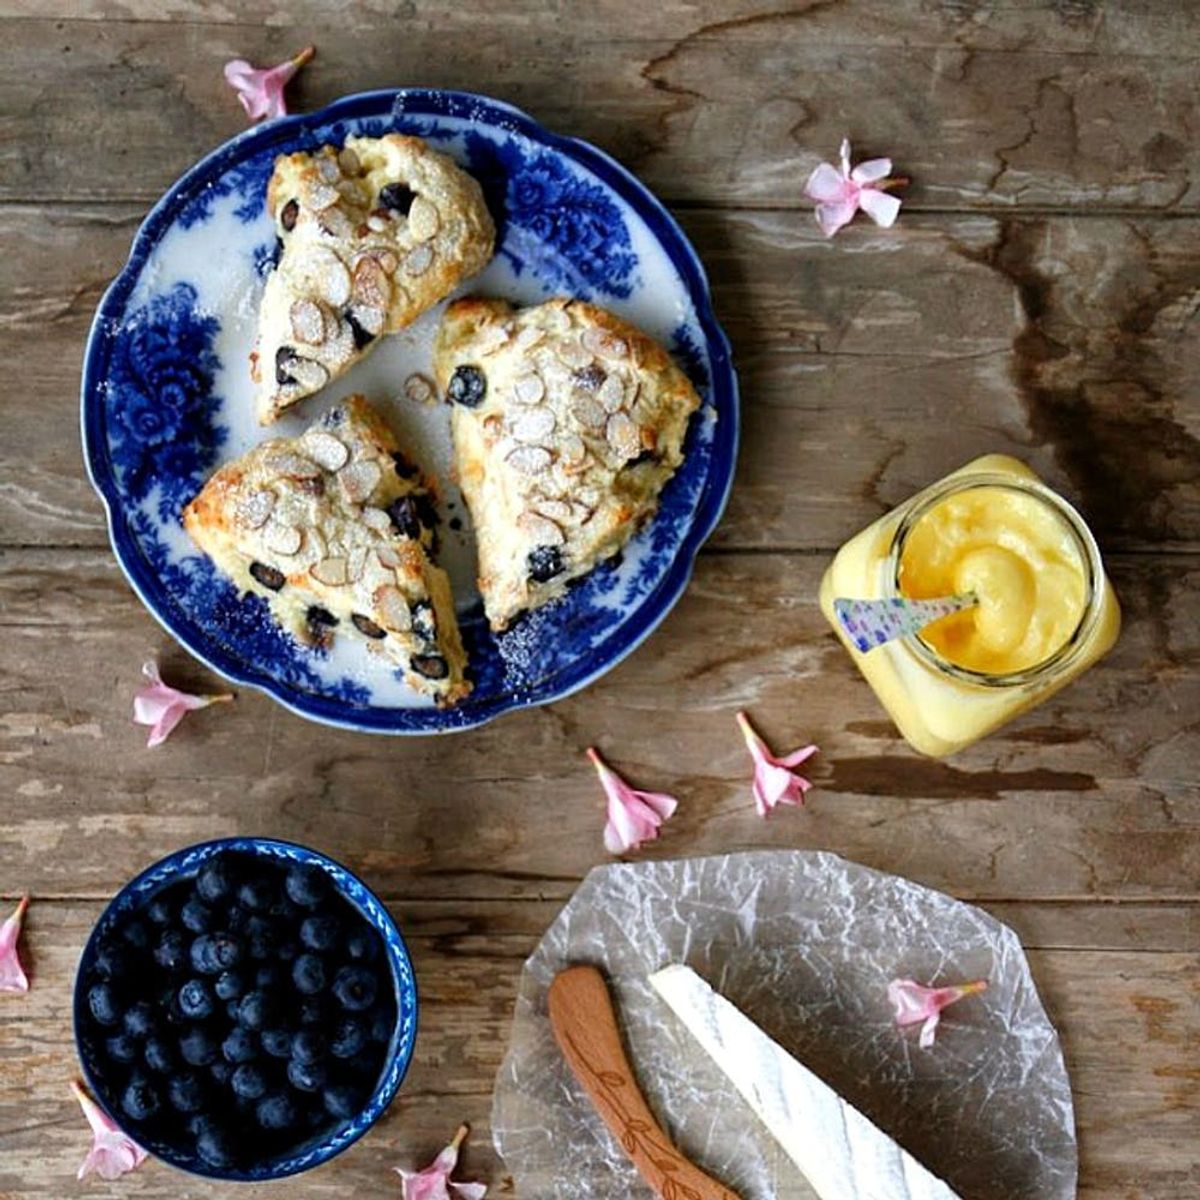 13 Scones to Add to Your Easter Brunch Menu